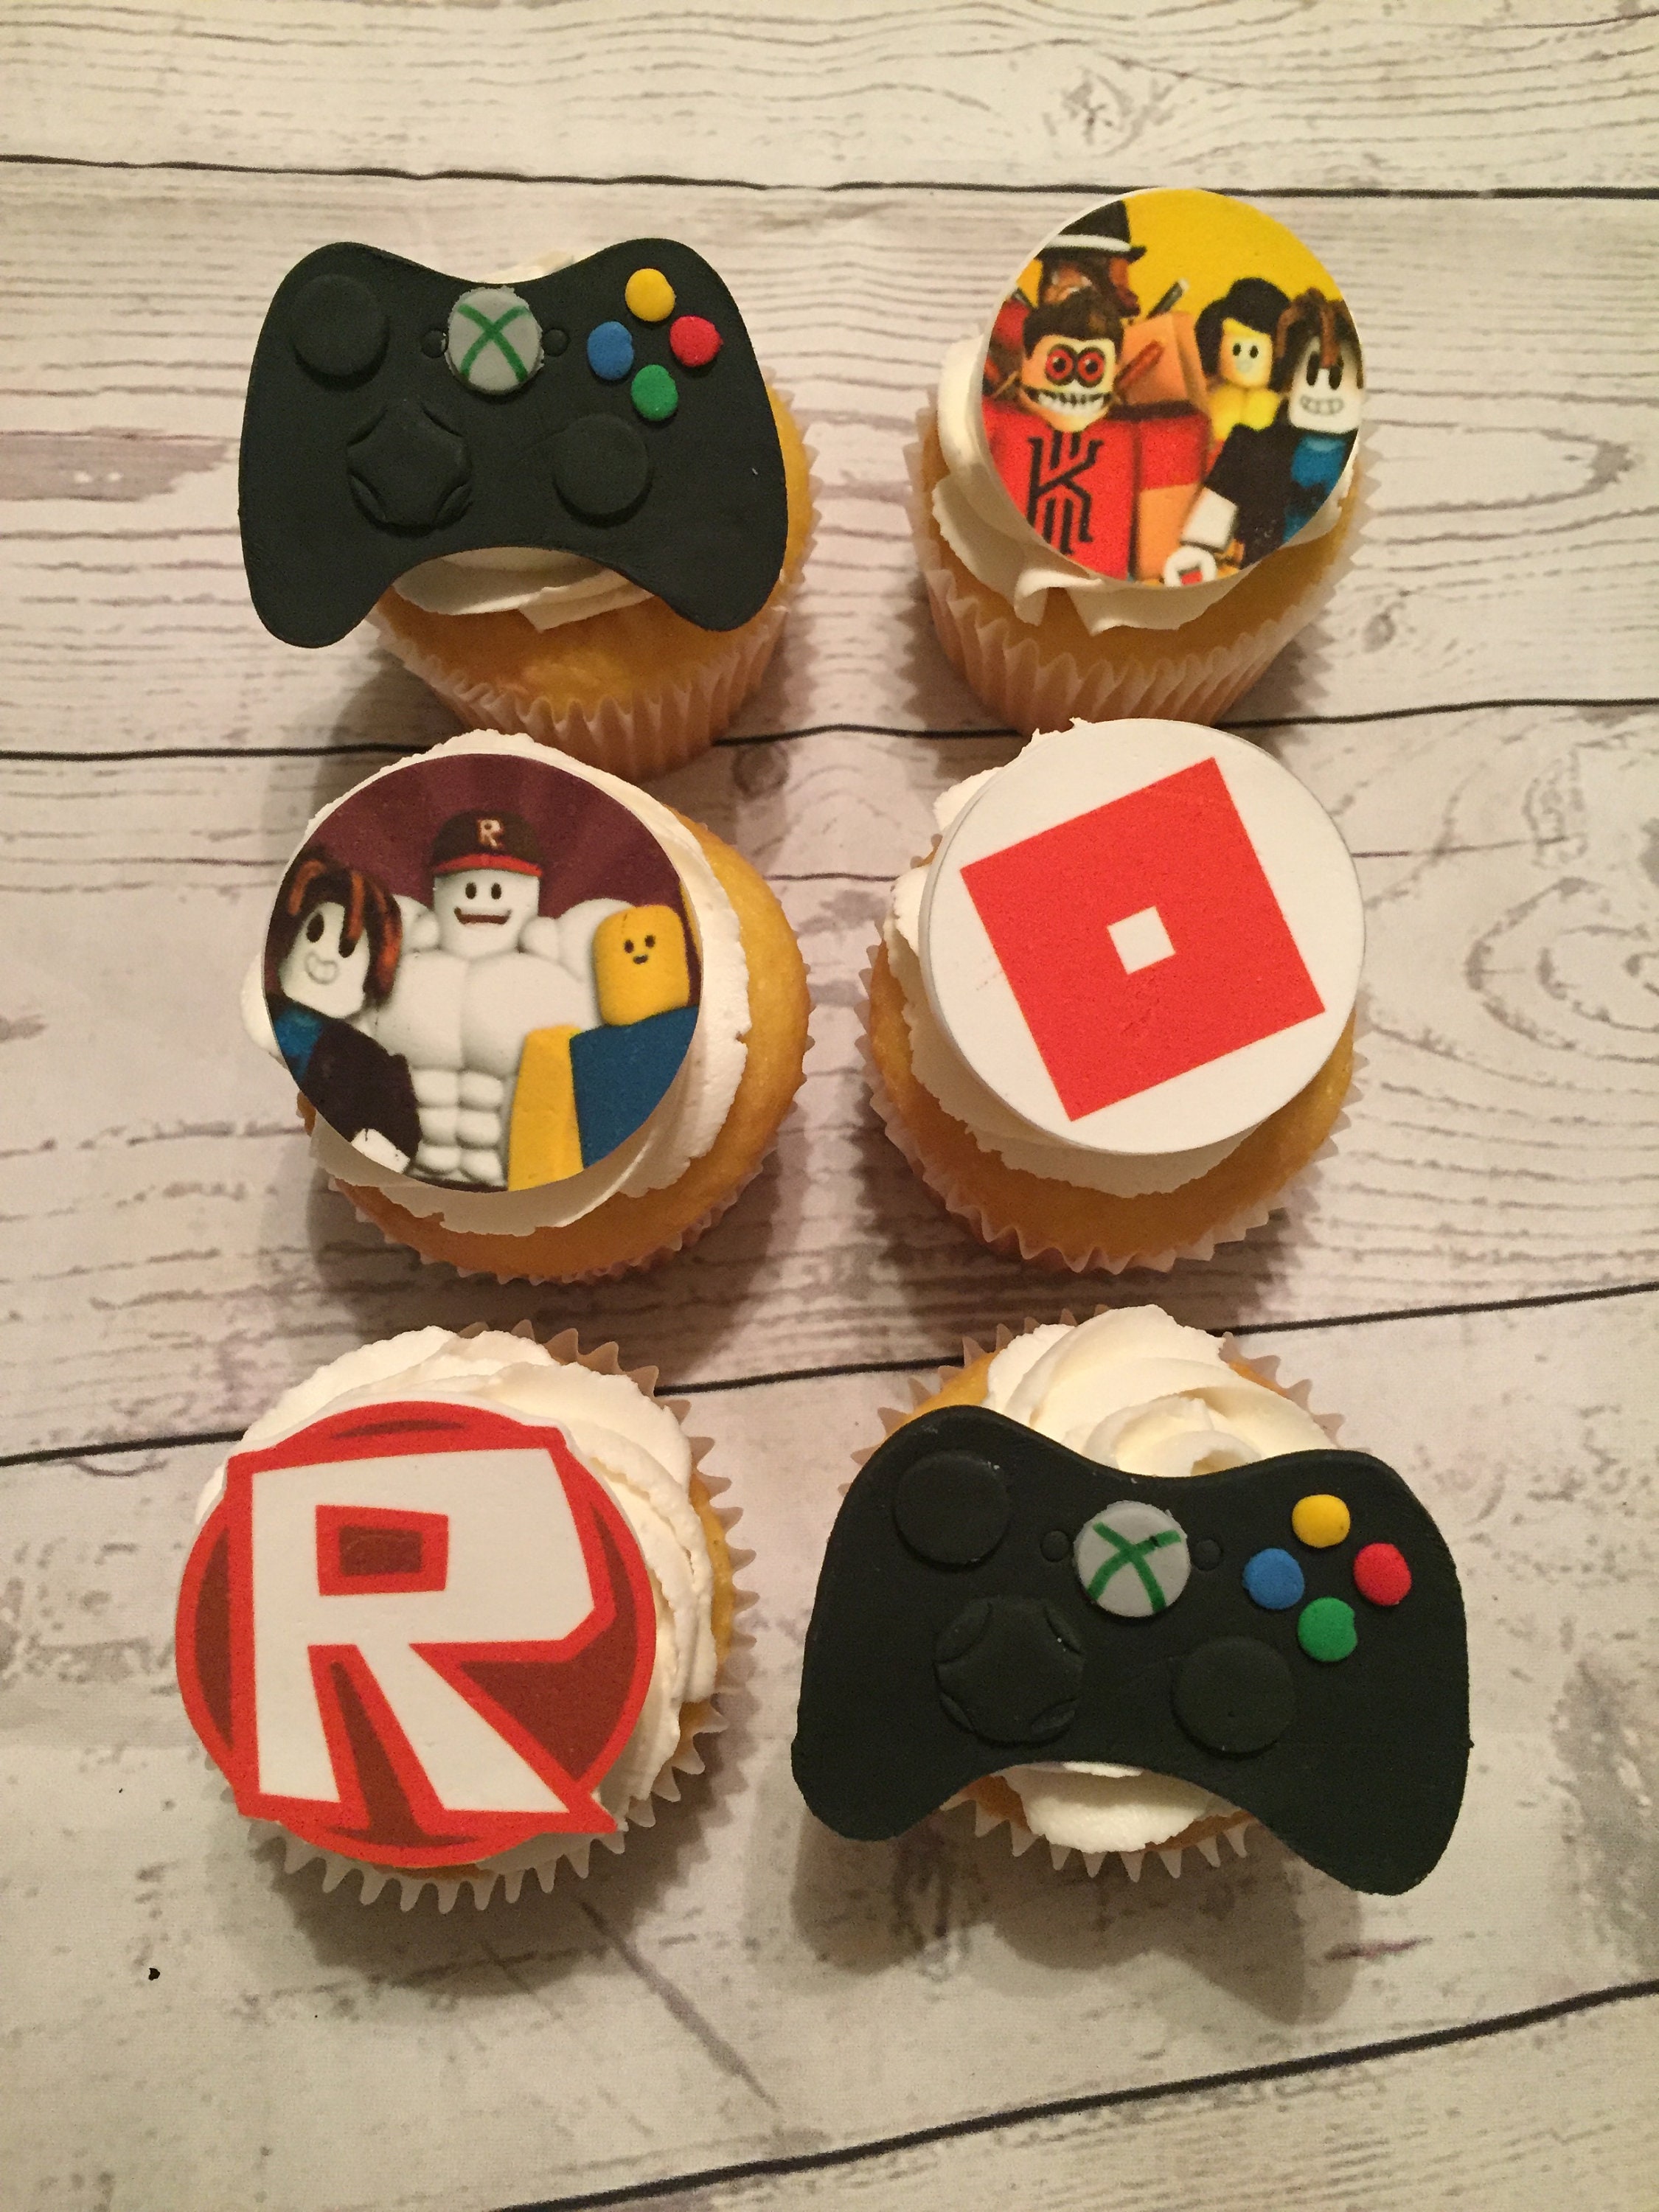 Roblox Pictures For Cakes Buxgg Spam - rip cake roblox